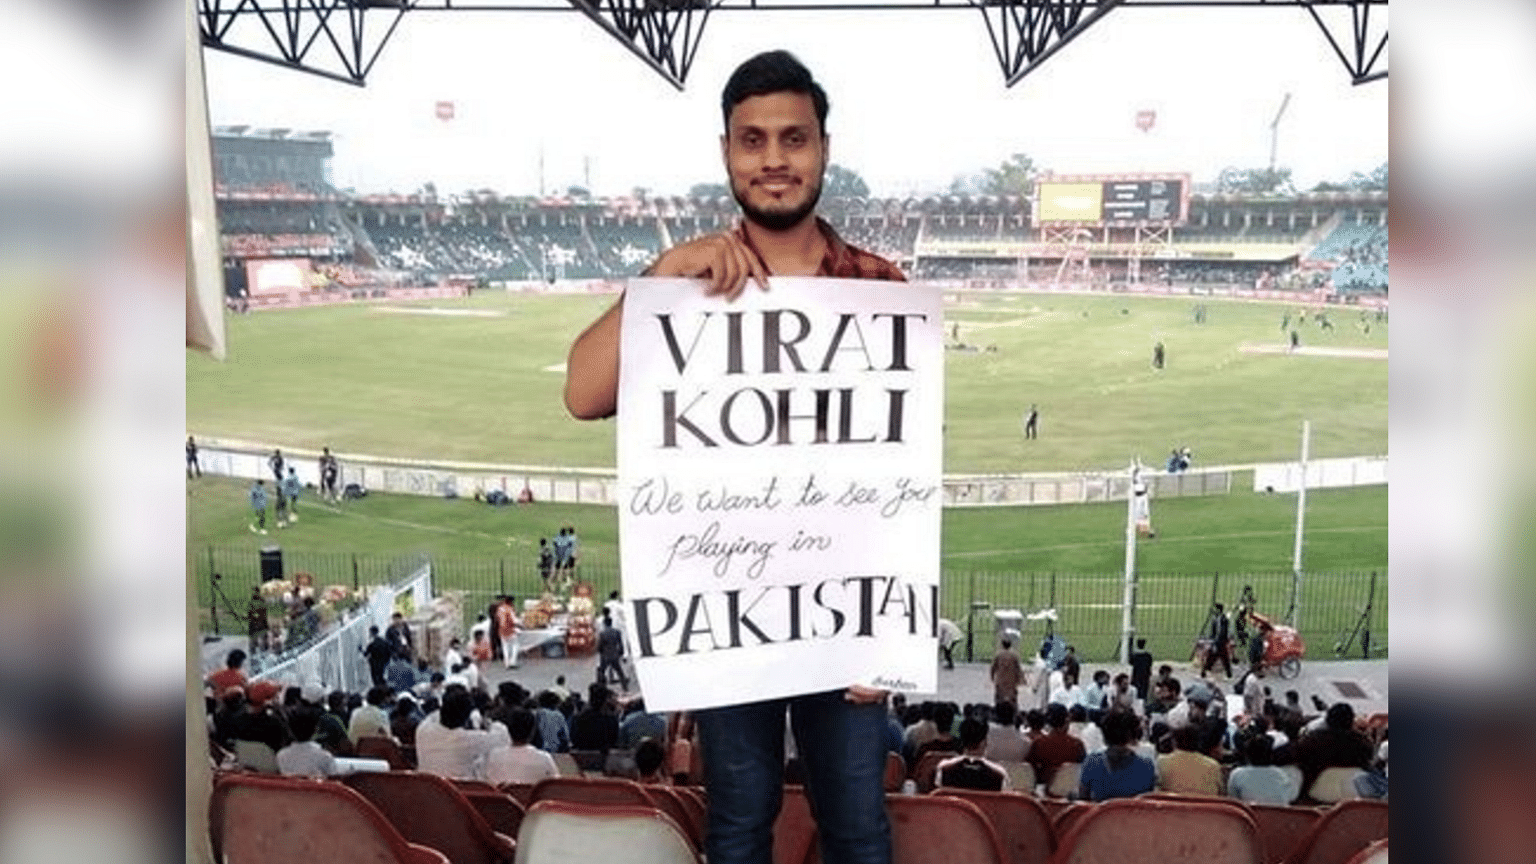 India captain Virat Kohli was invited to play in Pakistan by a supporter during the team’s home T20I match against Sri Lanka.